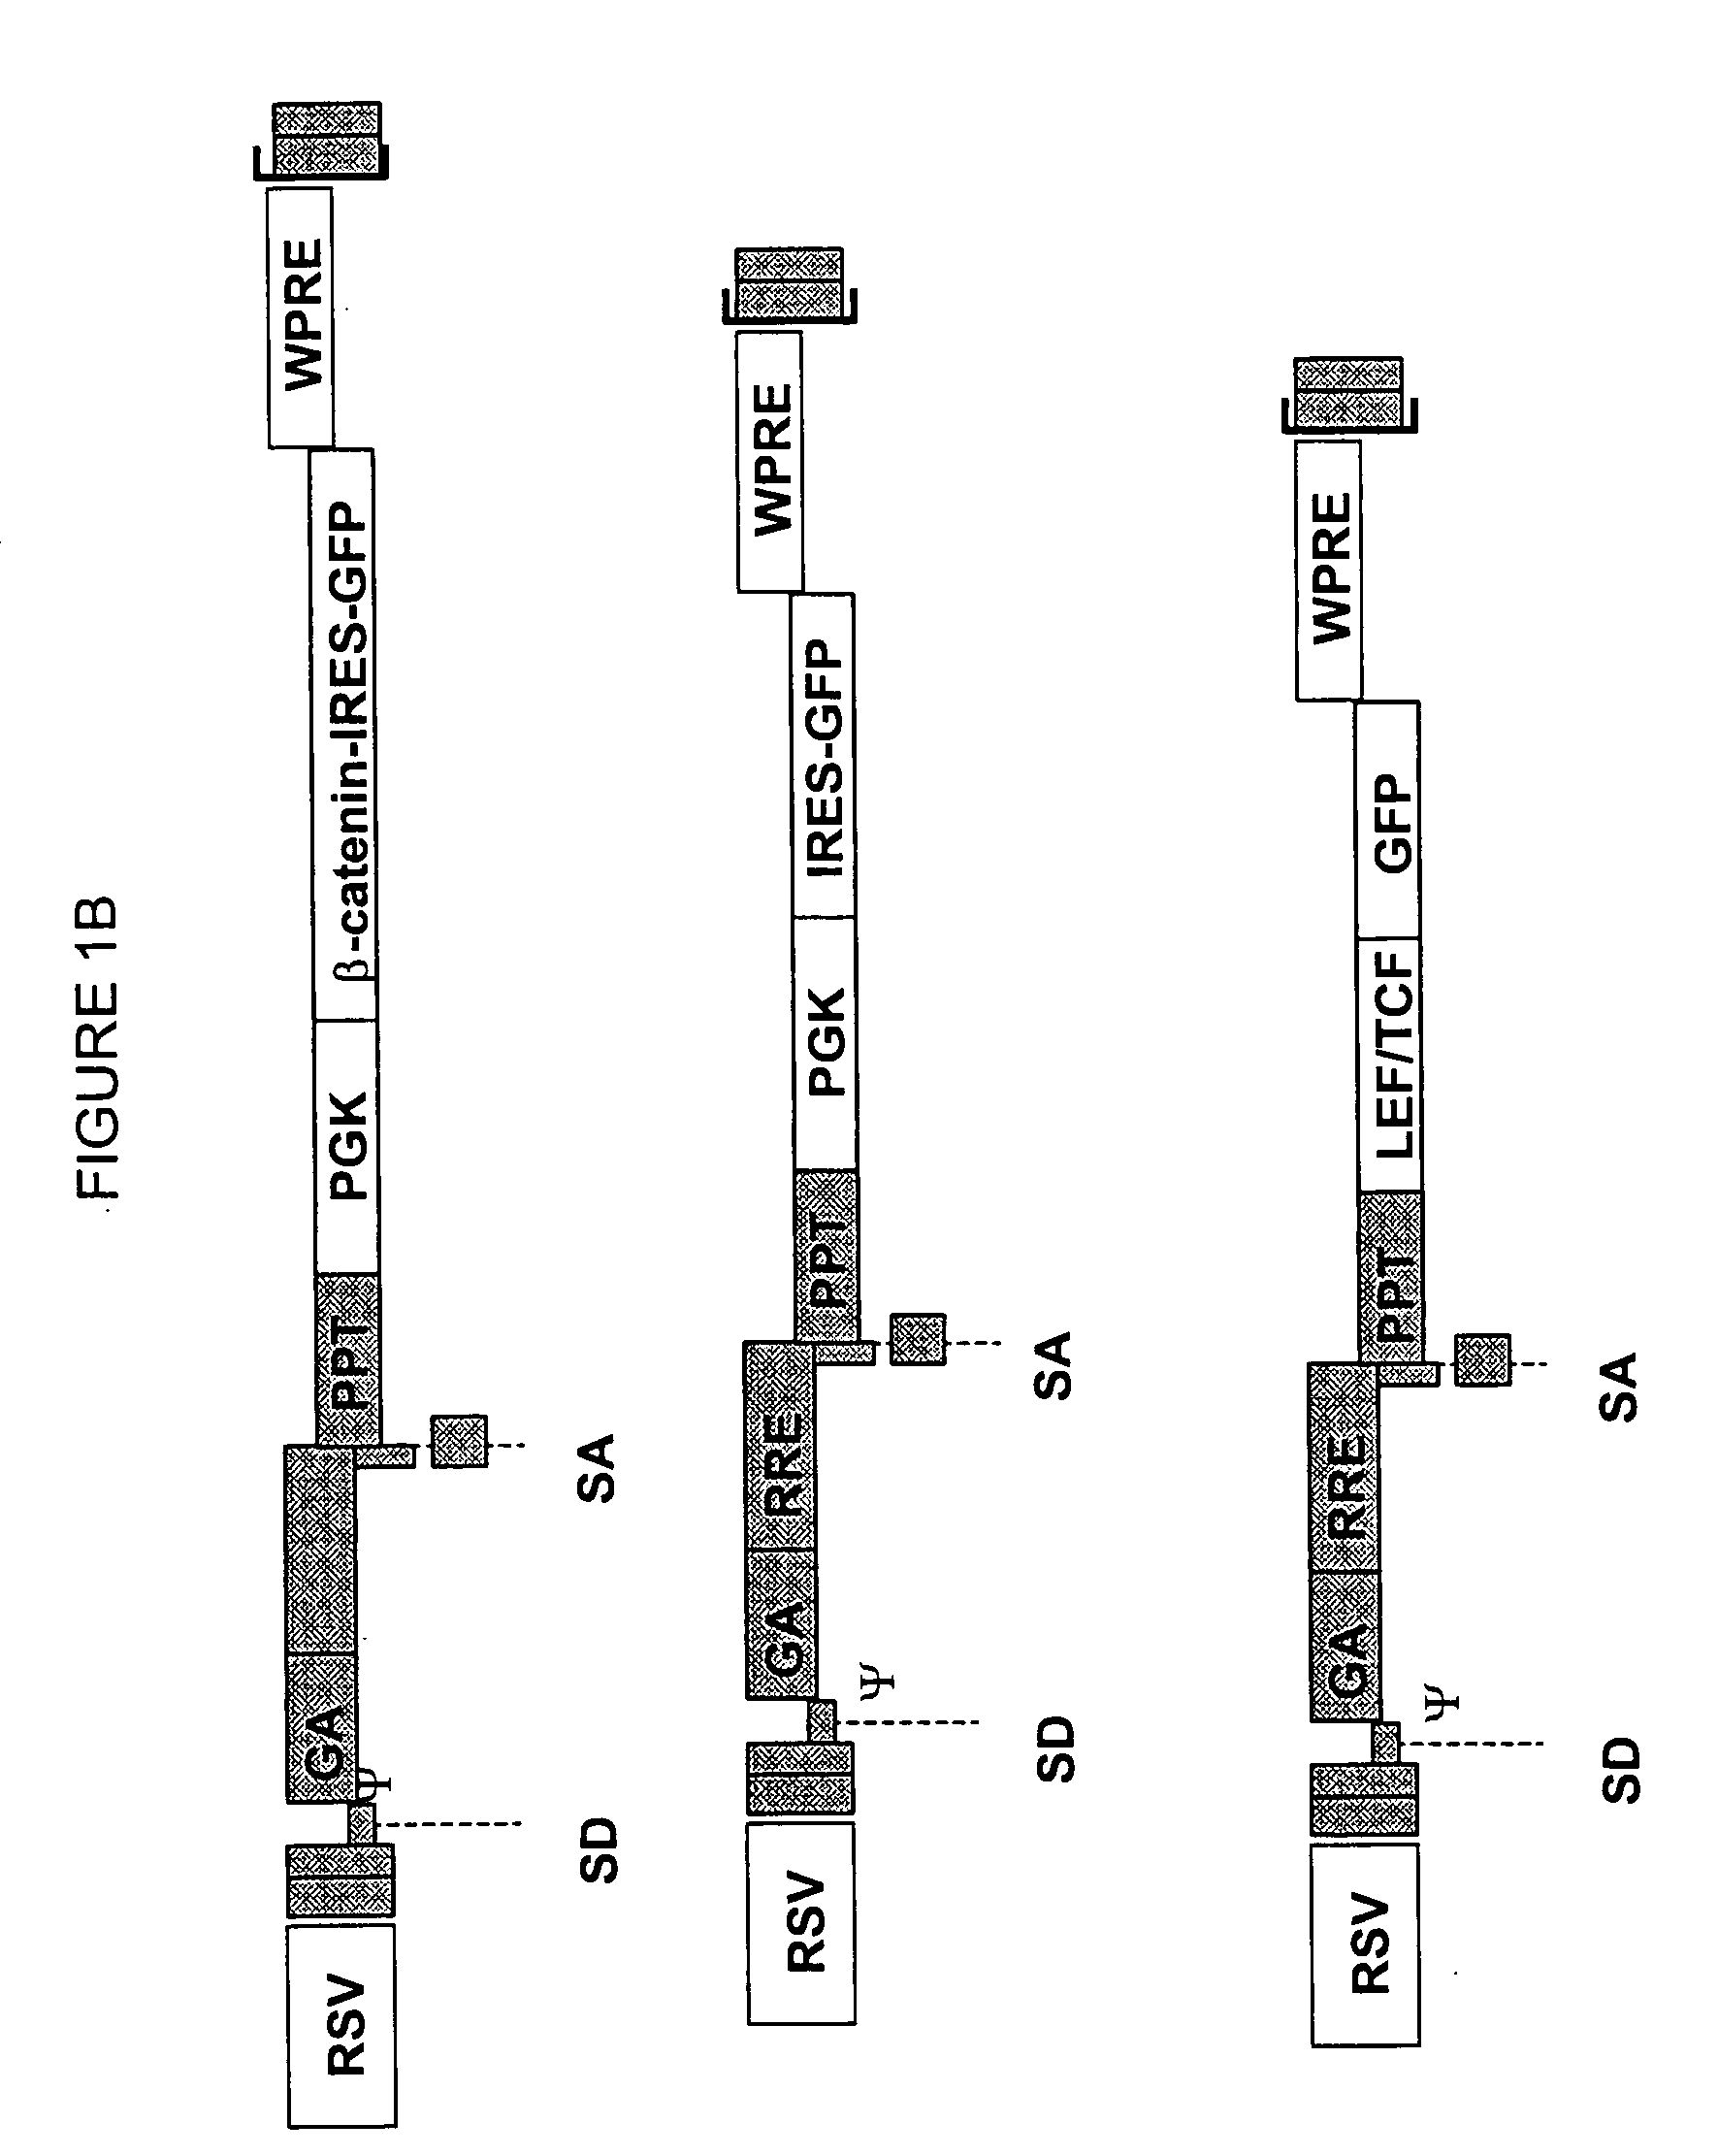 Methods of identifying and isolating stem cells and cancer stem cells